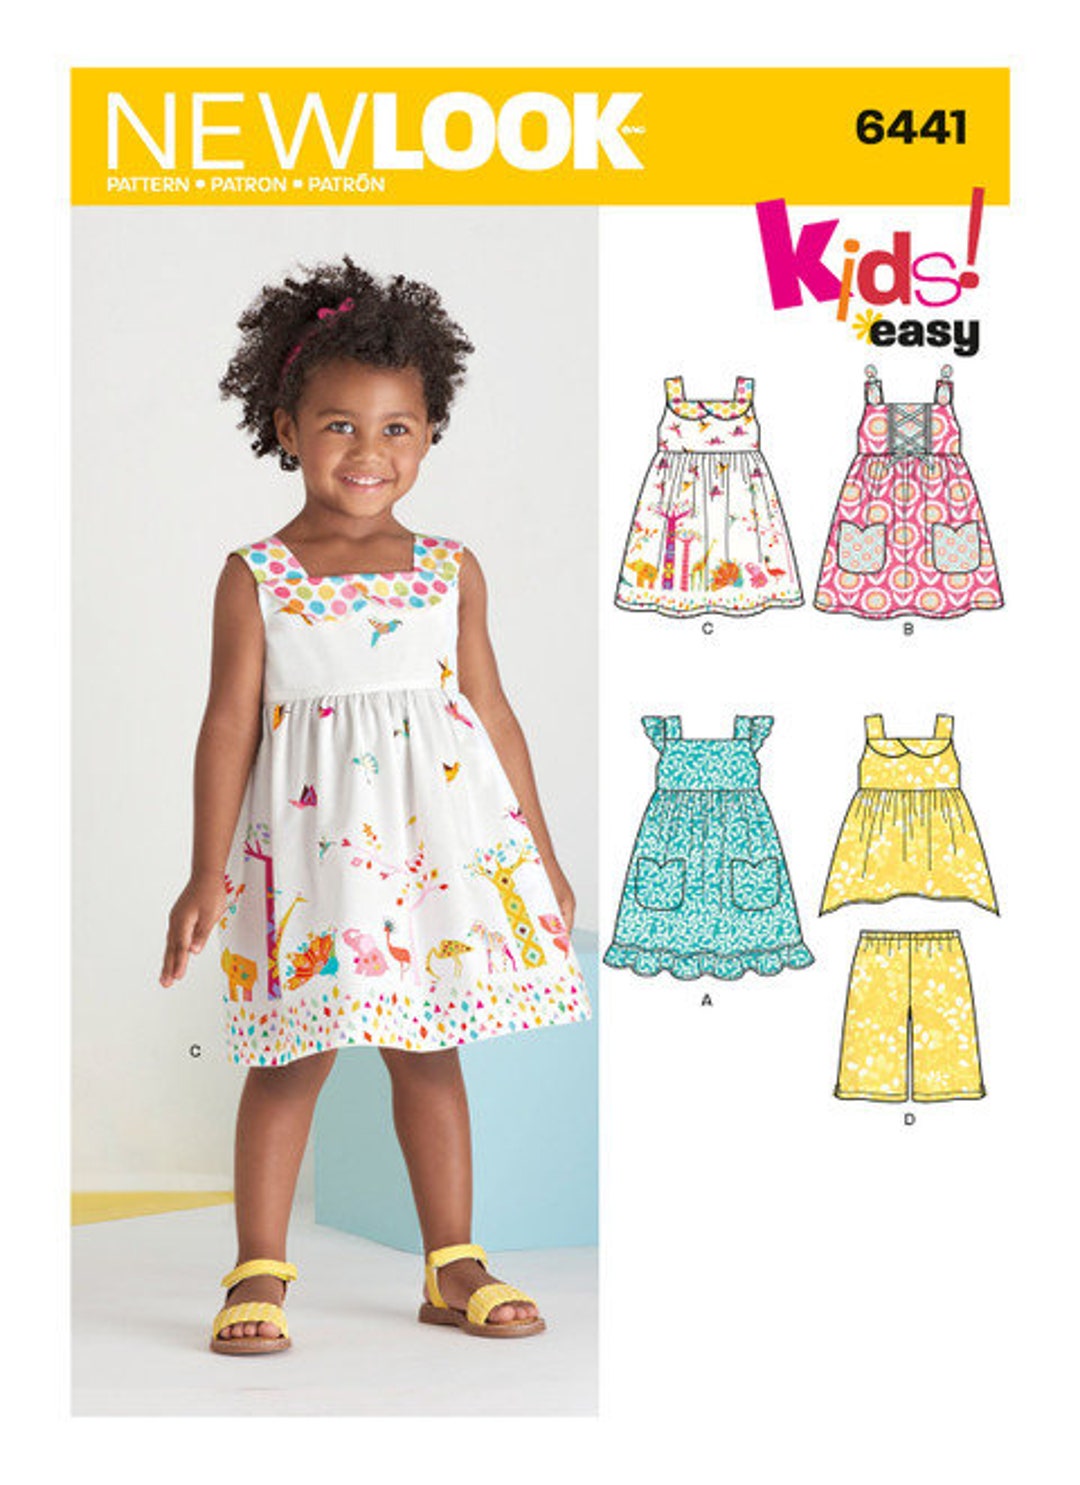 CUTE Toddlers' Dresses, Top and Cropped Pants, New Look 6441, Kids Easy ...